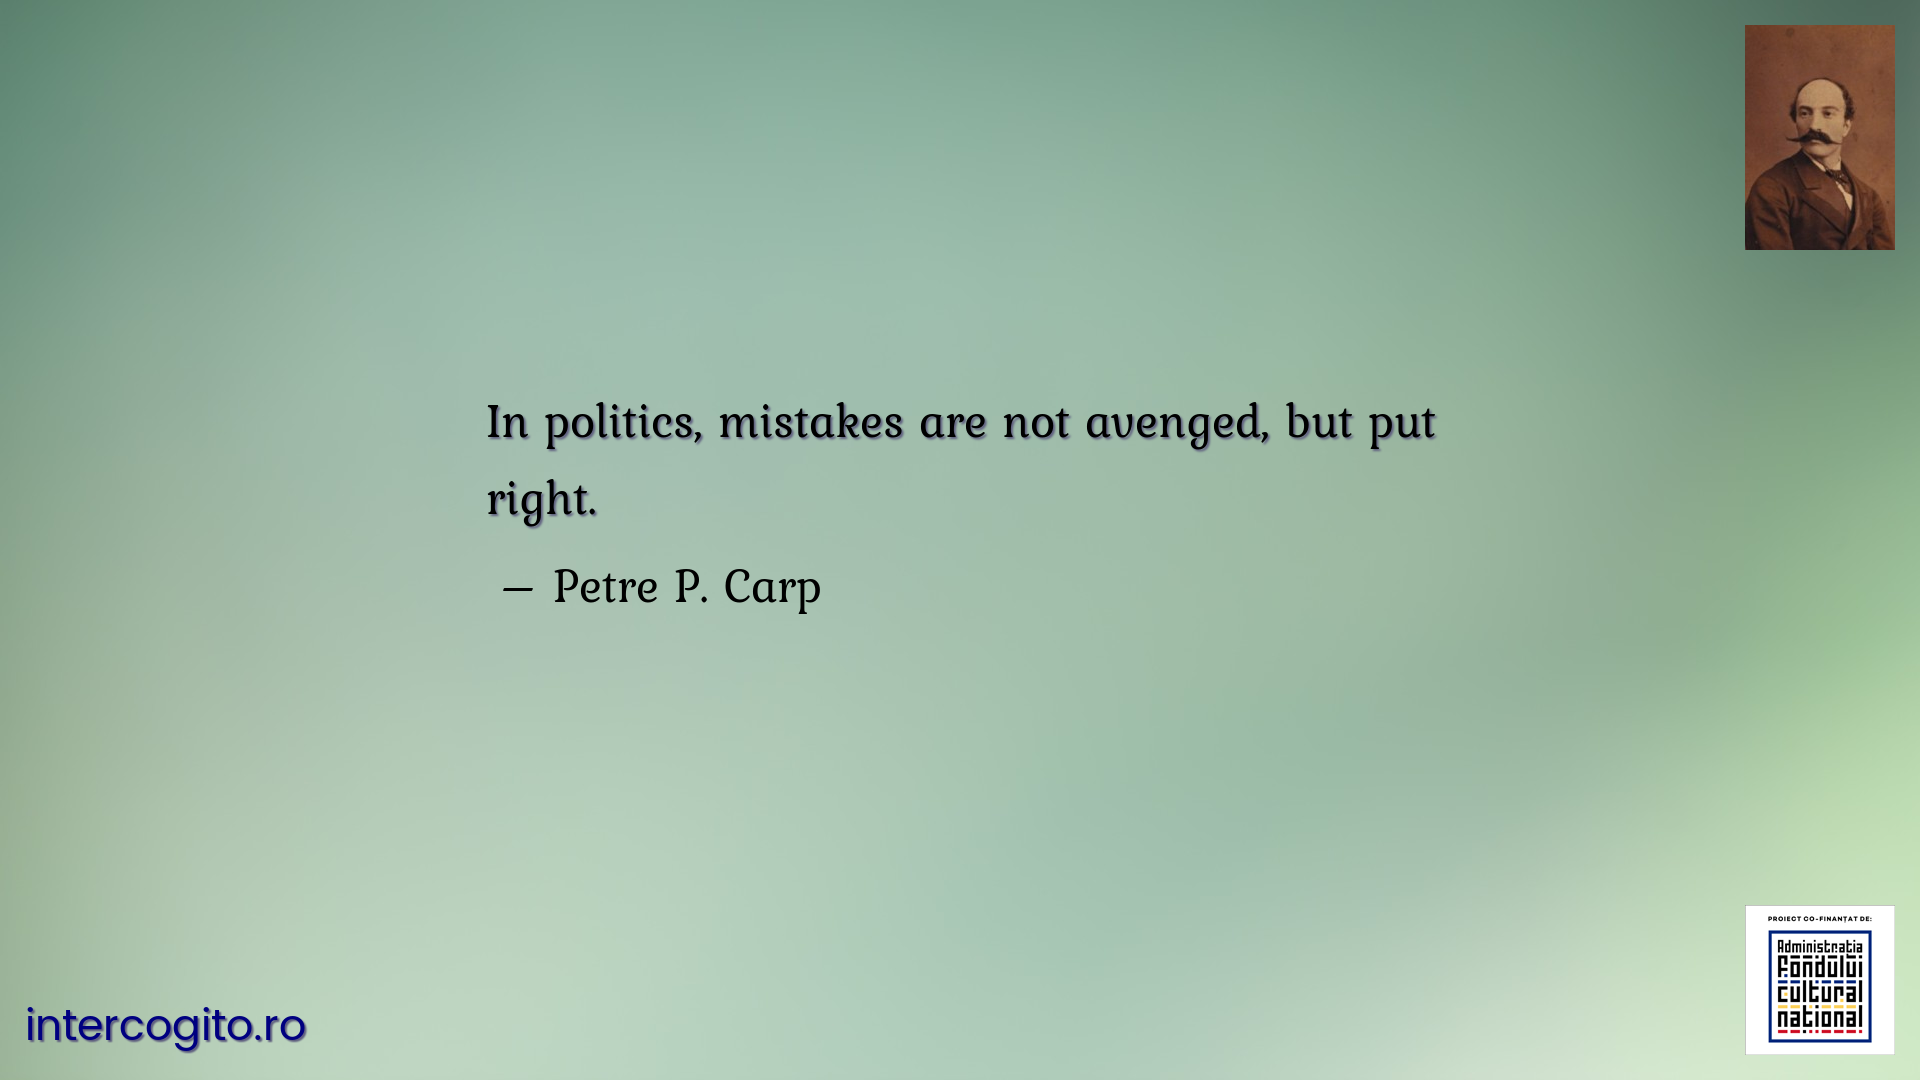 In politics, mistakes are not avenged, but put right.